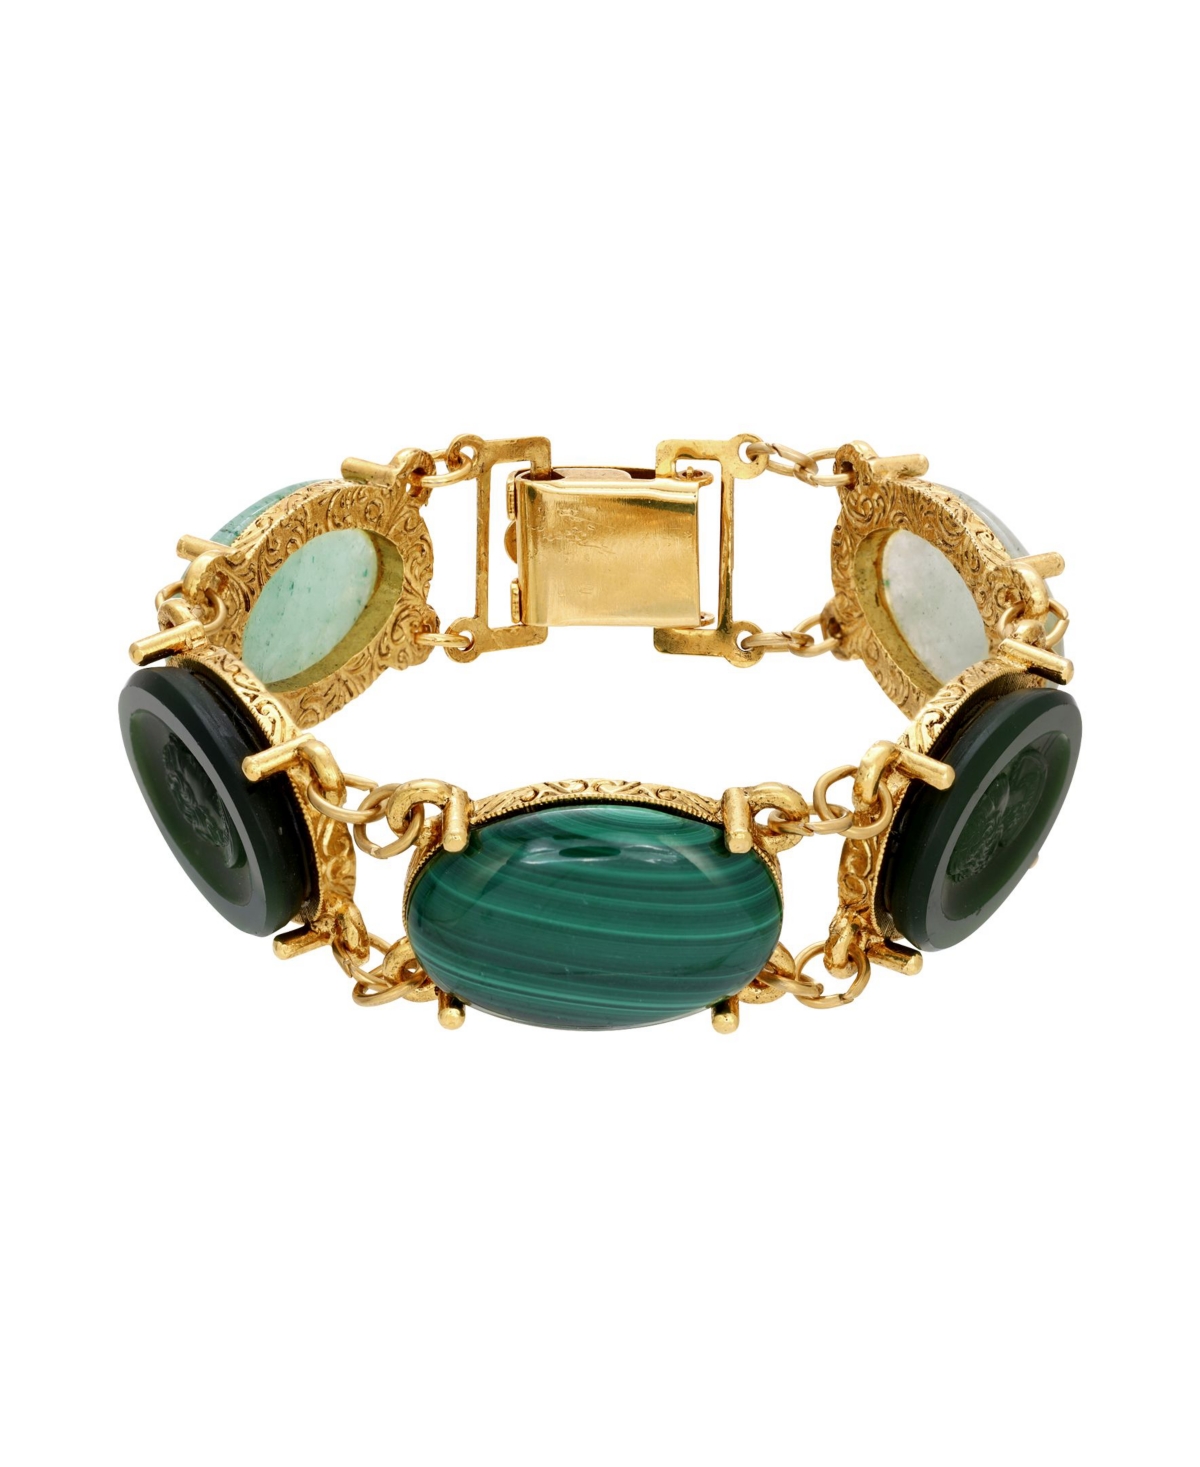 Victorian Jewelry Rings, Earrings, Necklaces, Hair Jewelry 2028 Gold-Tone Green Adventurine STone Link Bracelet - Green $59.50 AT vintagedancer.com